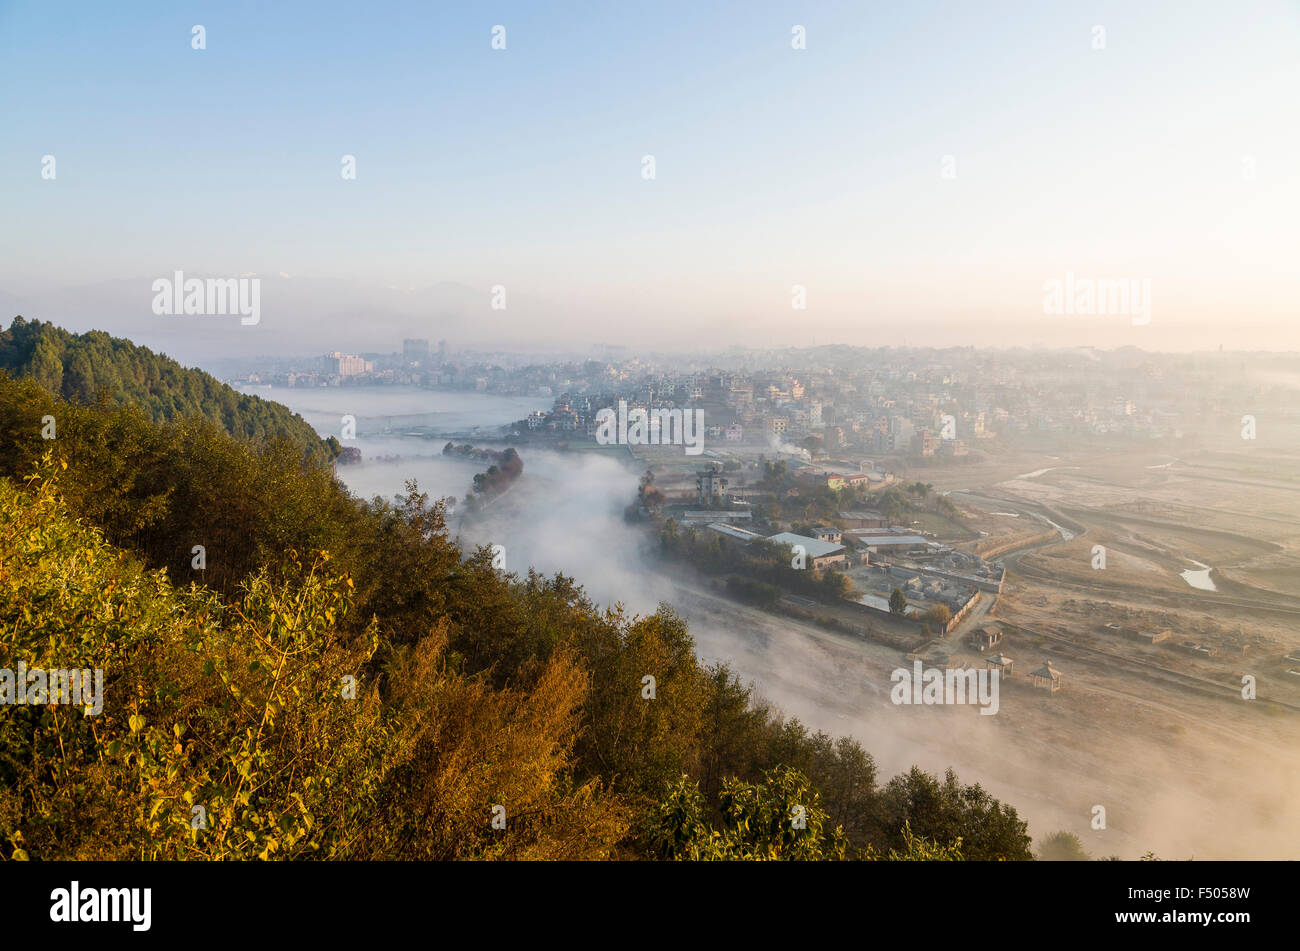 Kathmandu Valley in smog, snowy mountains in distance Stock Photo